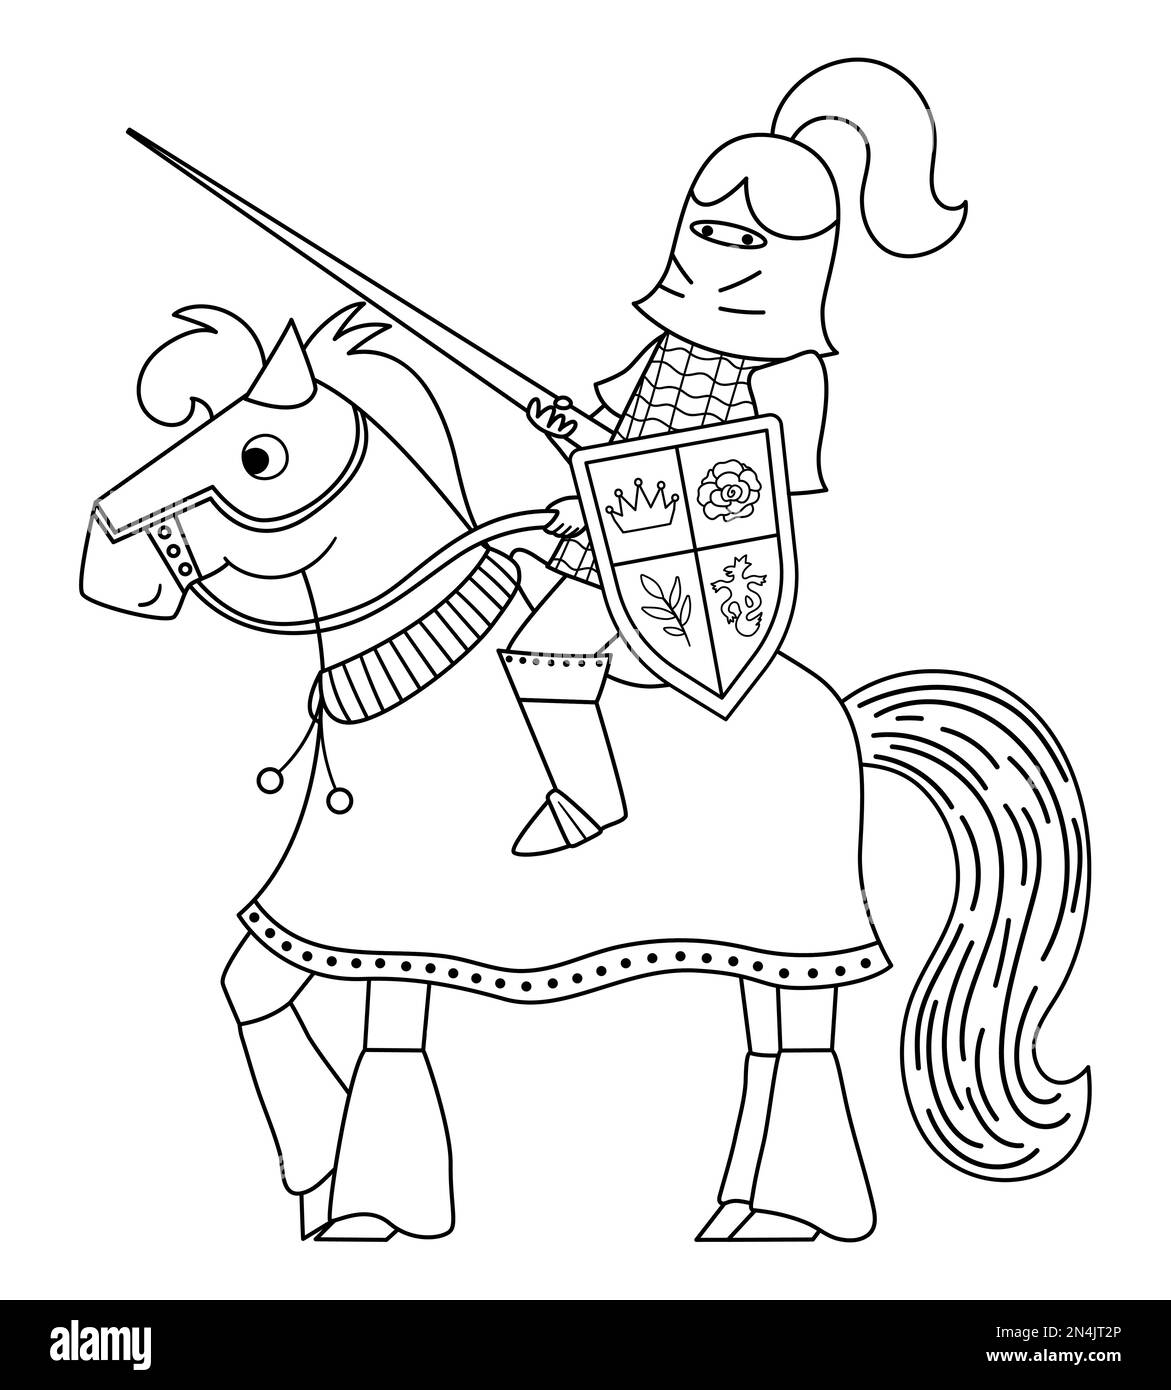 Fairy tale black and white knight on a horse. Fantasy line armored warrior coloring page. Fairytale soldier in helmet with sword, shield. Cartoon icon Stock Vector